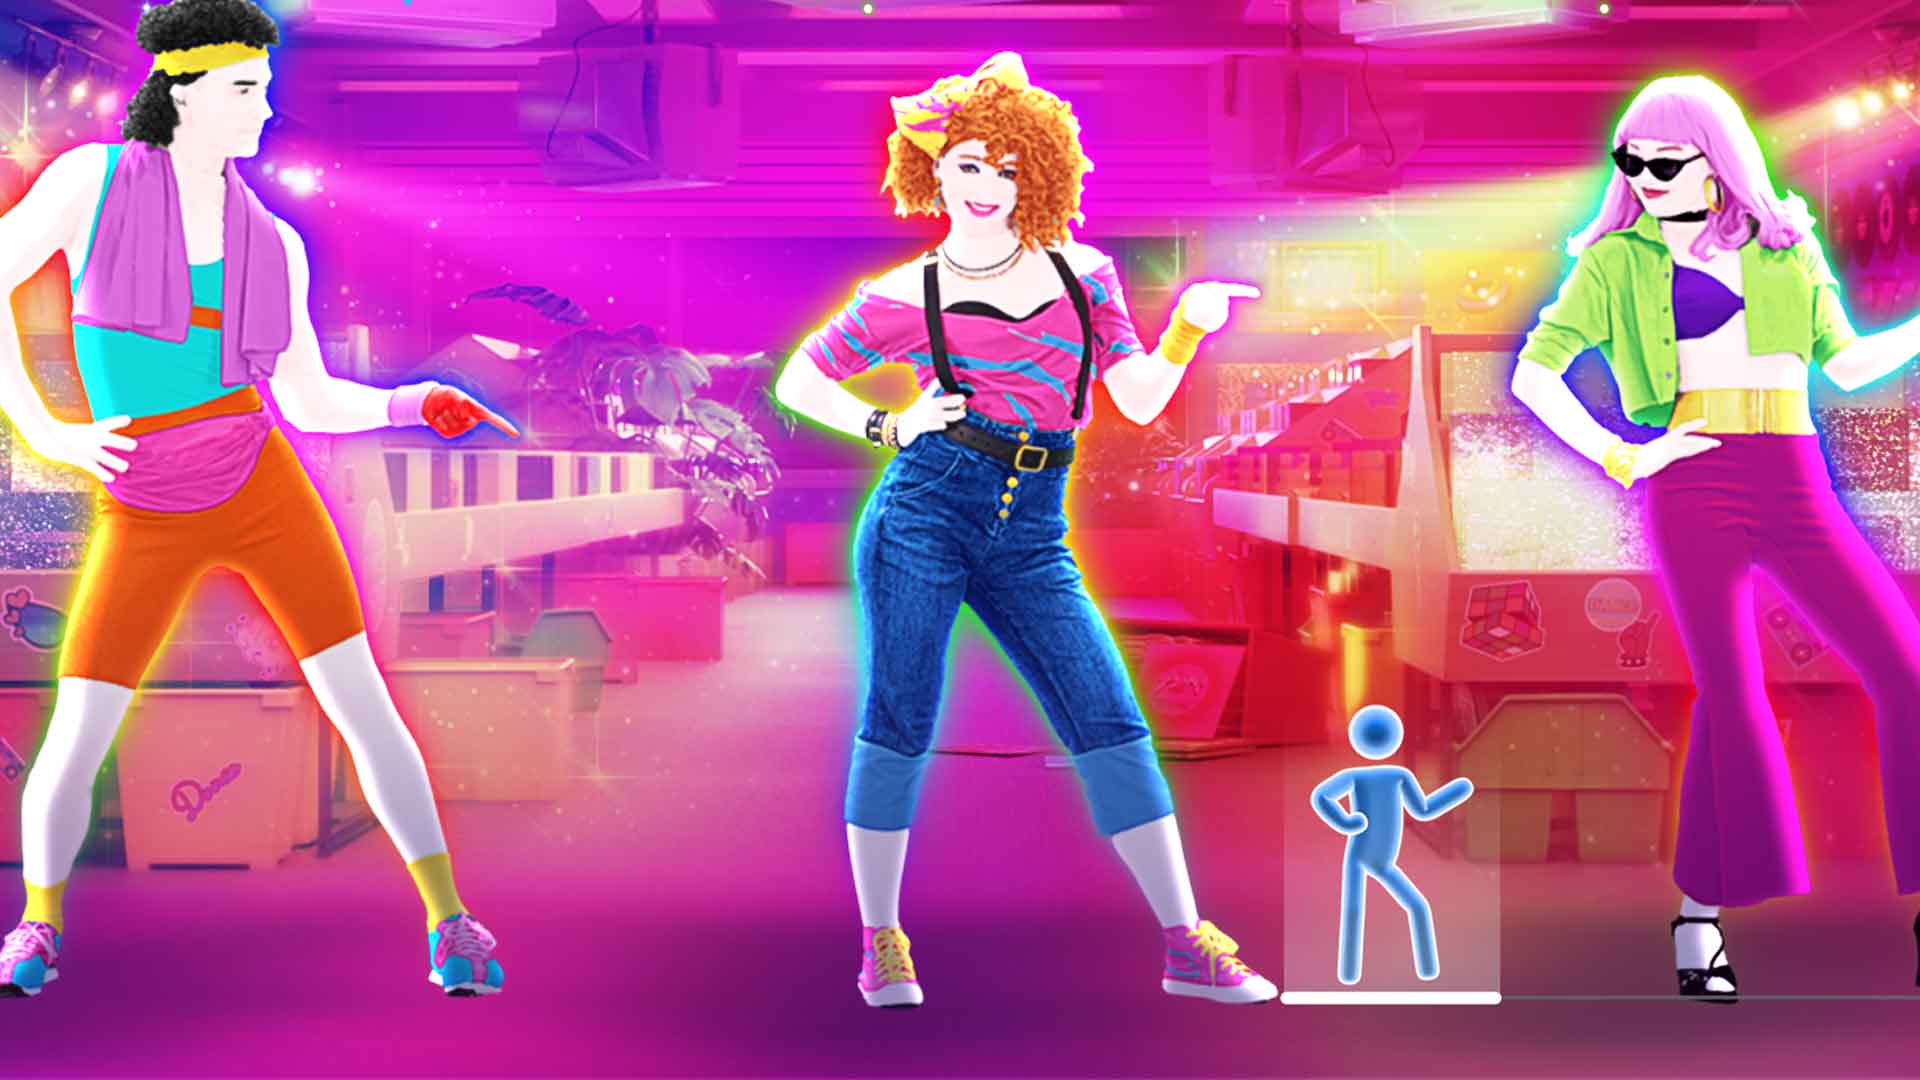 Just Dance: 2024 Edition  Launch Song List Trailer (Miley Cyrus